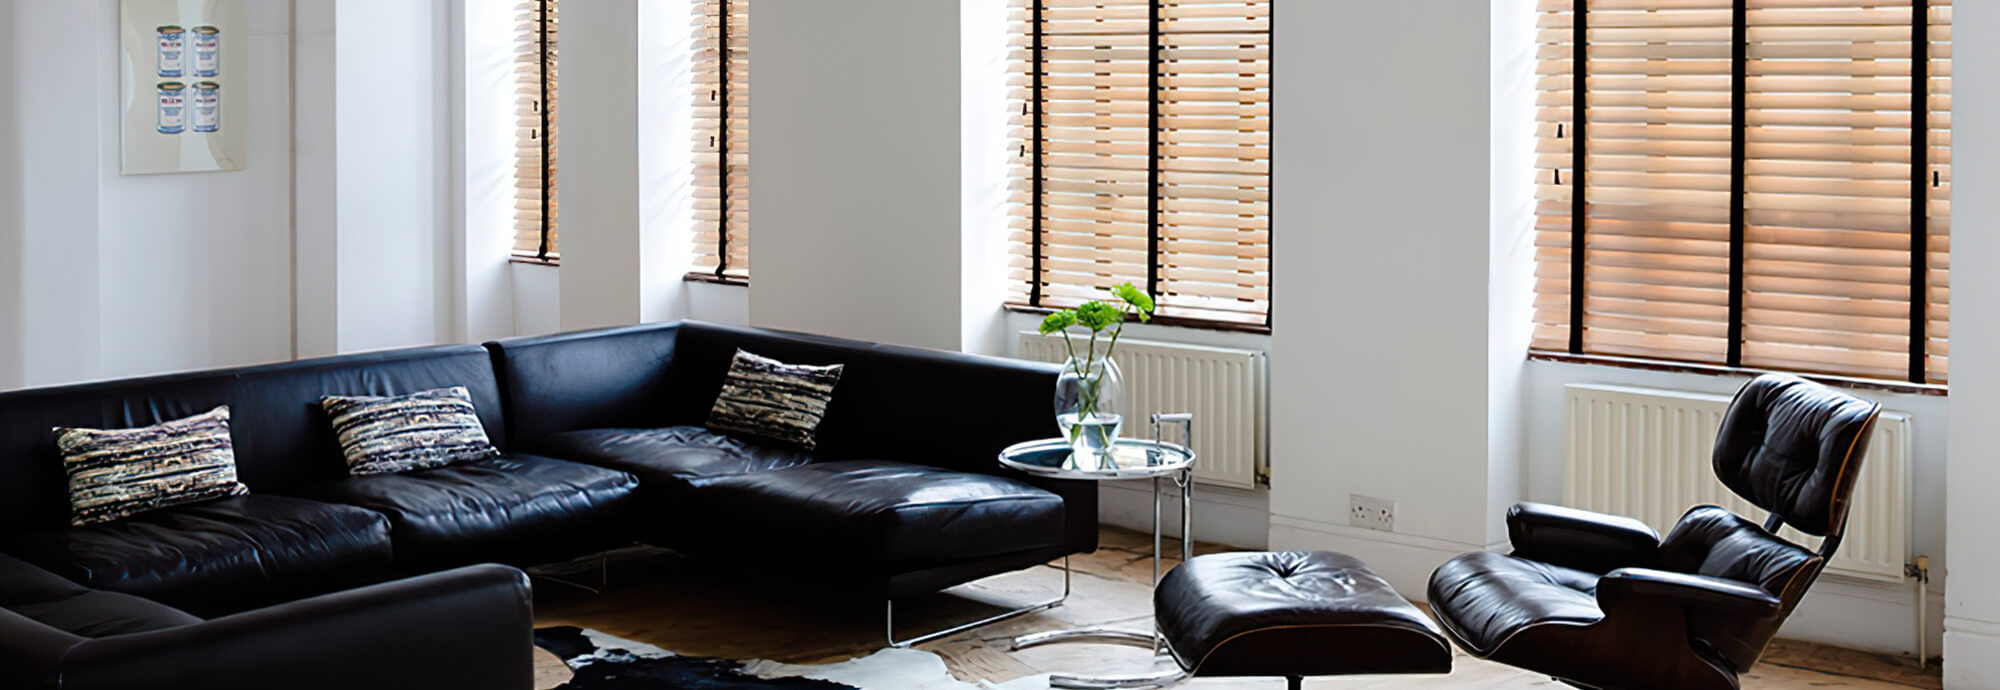 Beautiful blinds provided by Leamington Blinds